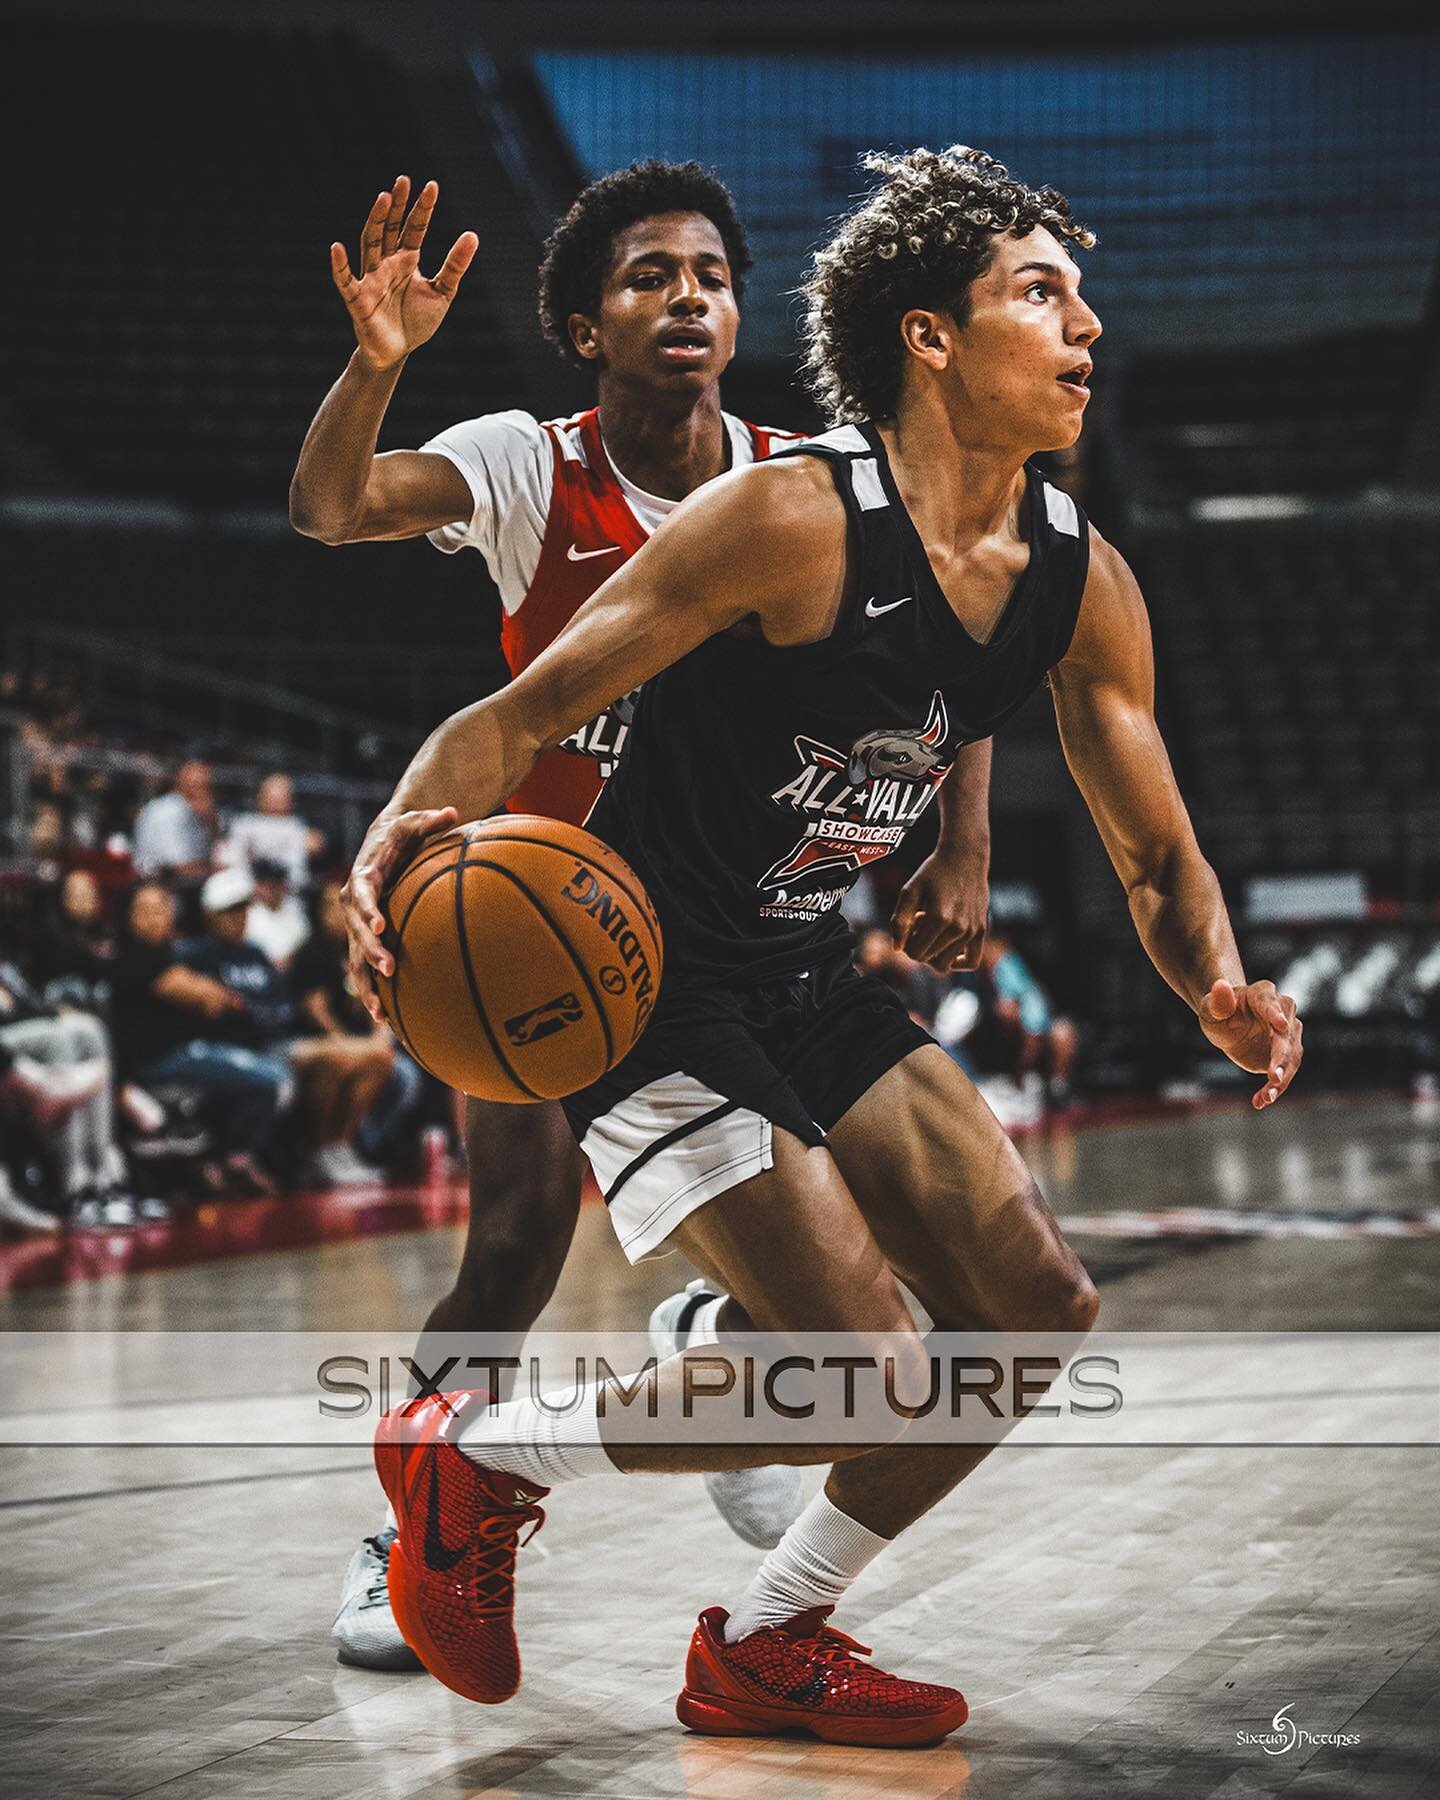 RGV boys basketball players met at Bert Ogden Arena yesterday for the All Valley Showcase. West defeated East 116-96 🏀 
Full story at sixtumsports.com
March 30 2024
📸 @shotsbyhawk